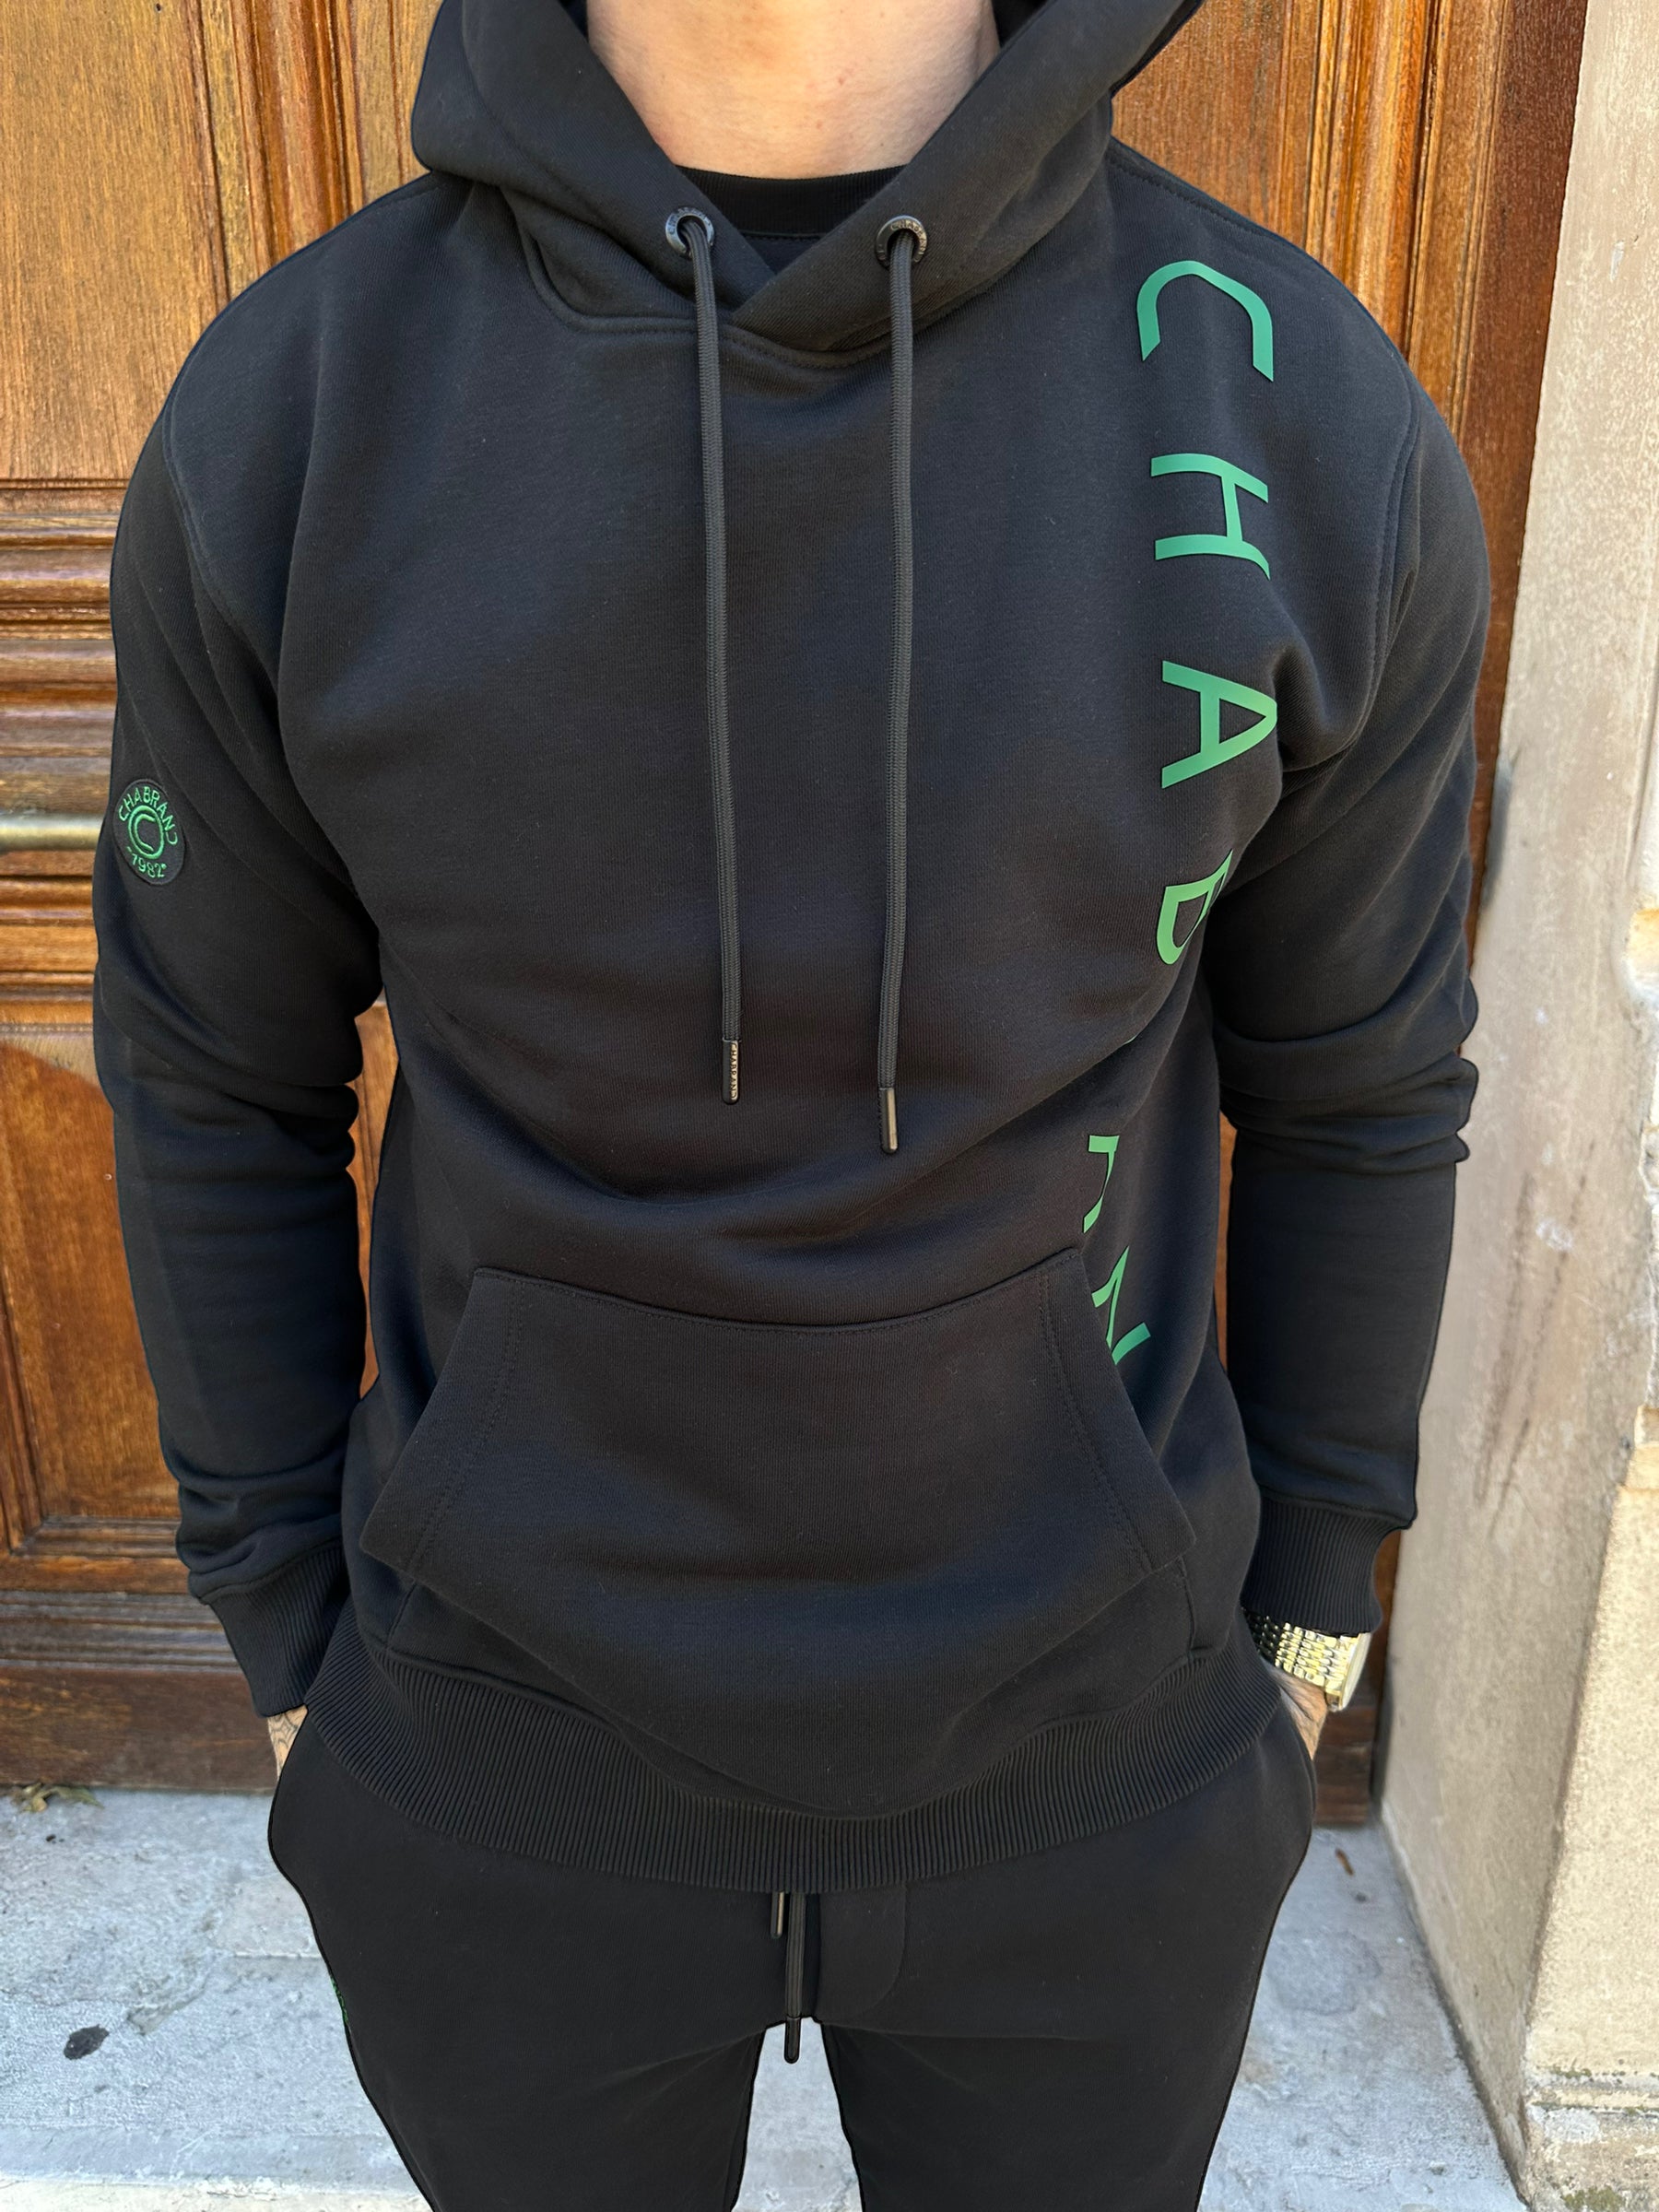 CHABRAND - Black hooded sweatshirt with green sign